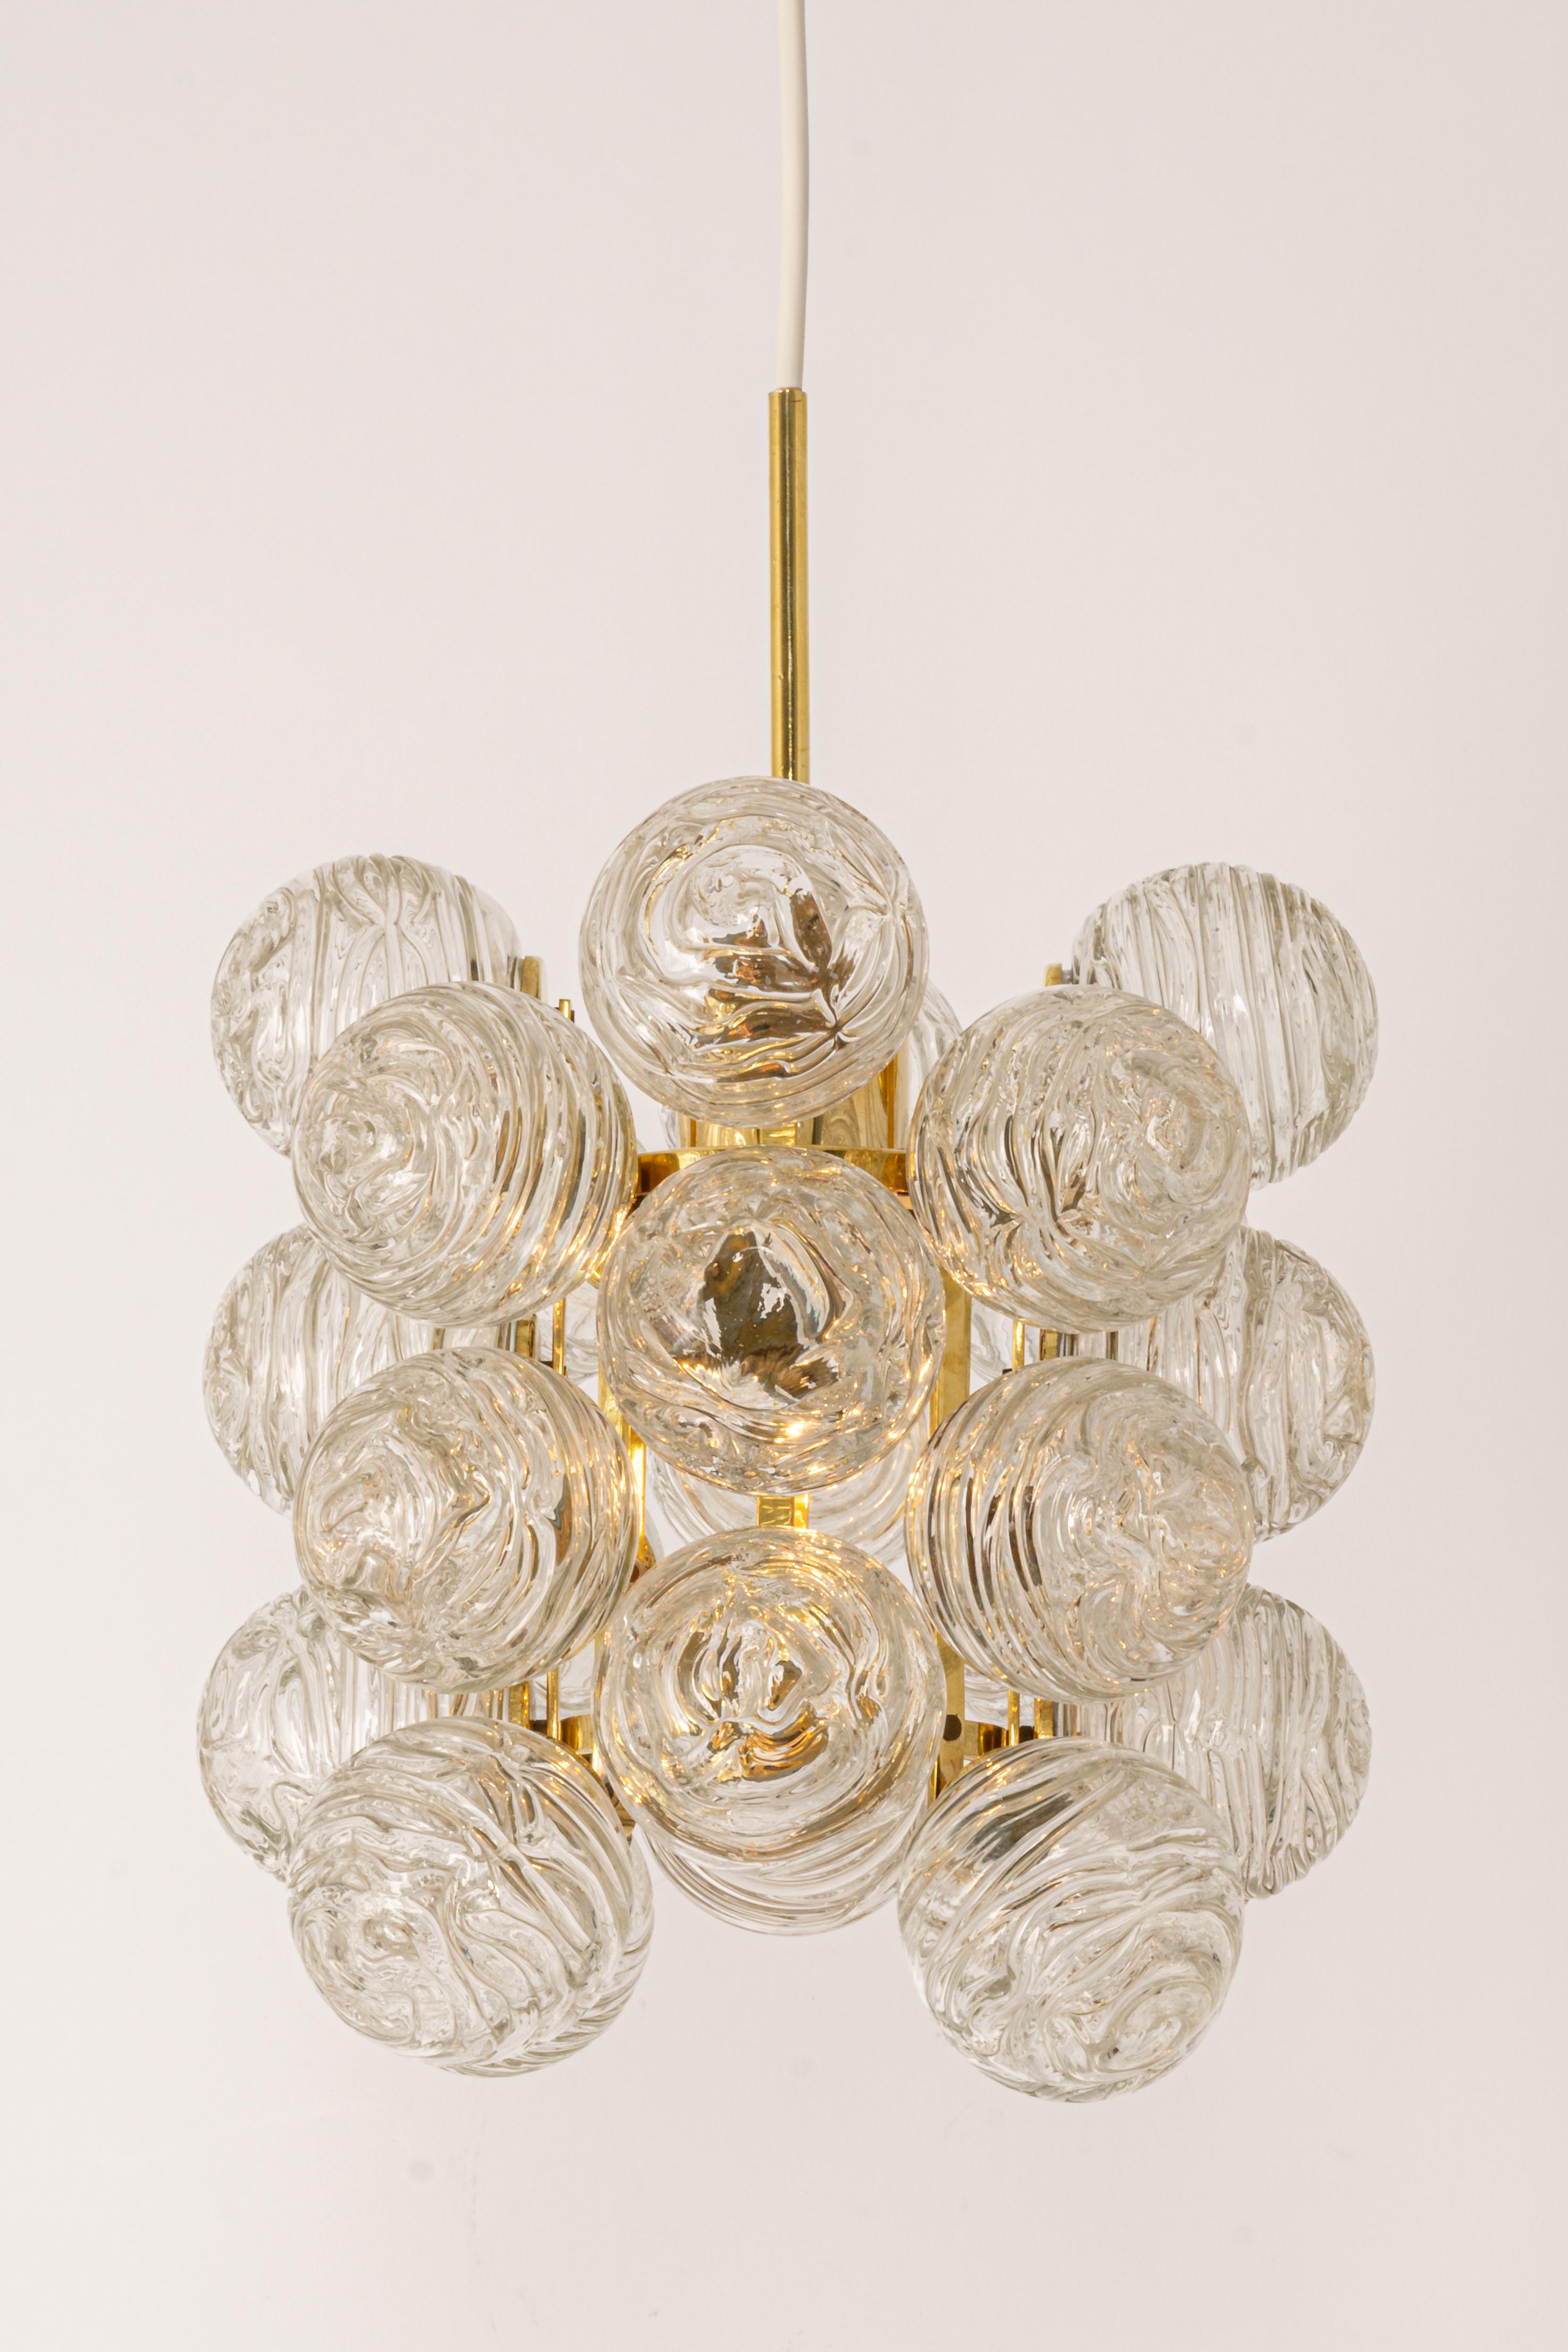 A petite midcentury pendant made by Doria Leuchtern, manufactured in Germany, circa 1970-1979.
The pendant is composed of many Murano glass swirl textured glass elements (snowballs) attached to a brass frame.

Sockets: 1 x E27 standard bulb. (Up